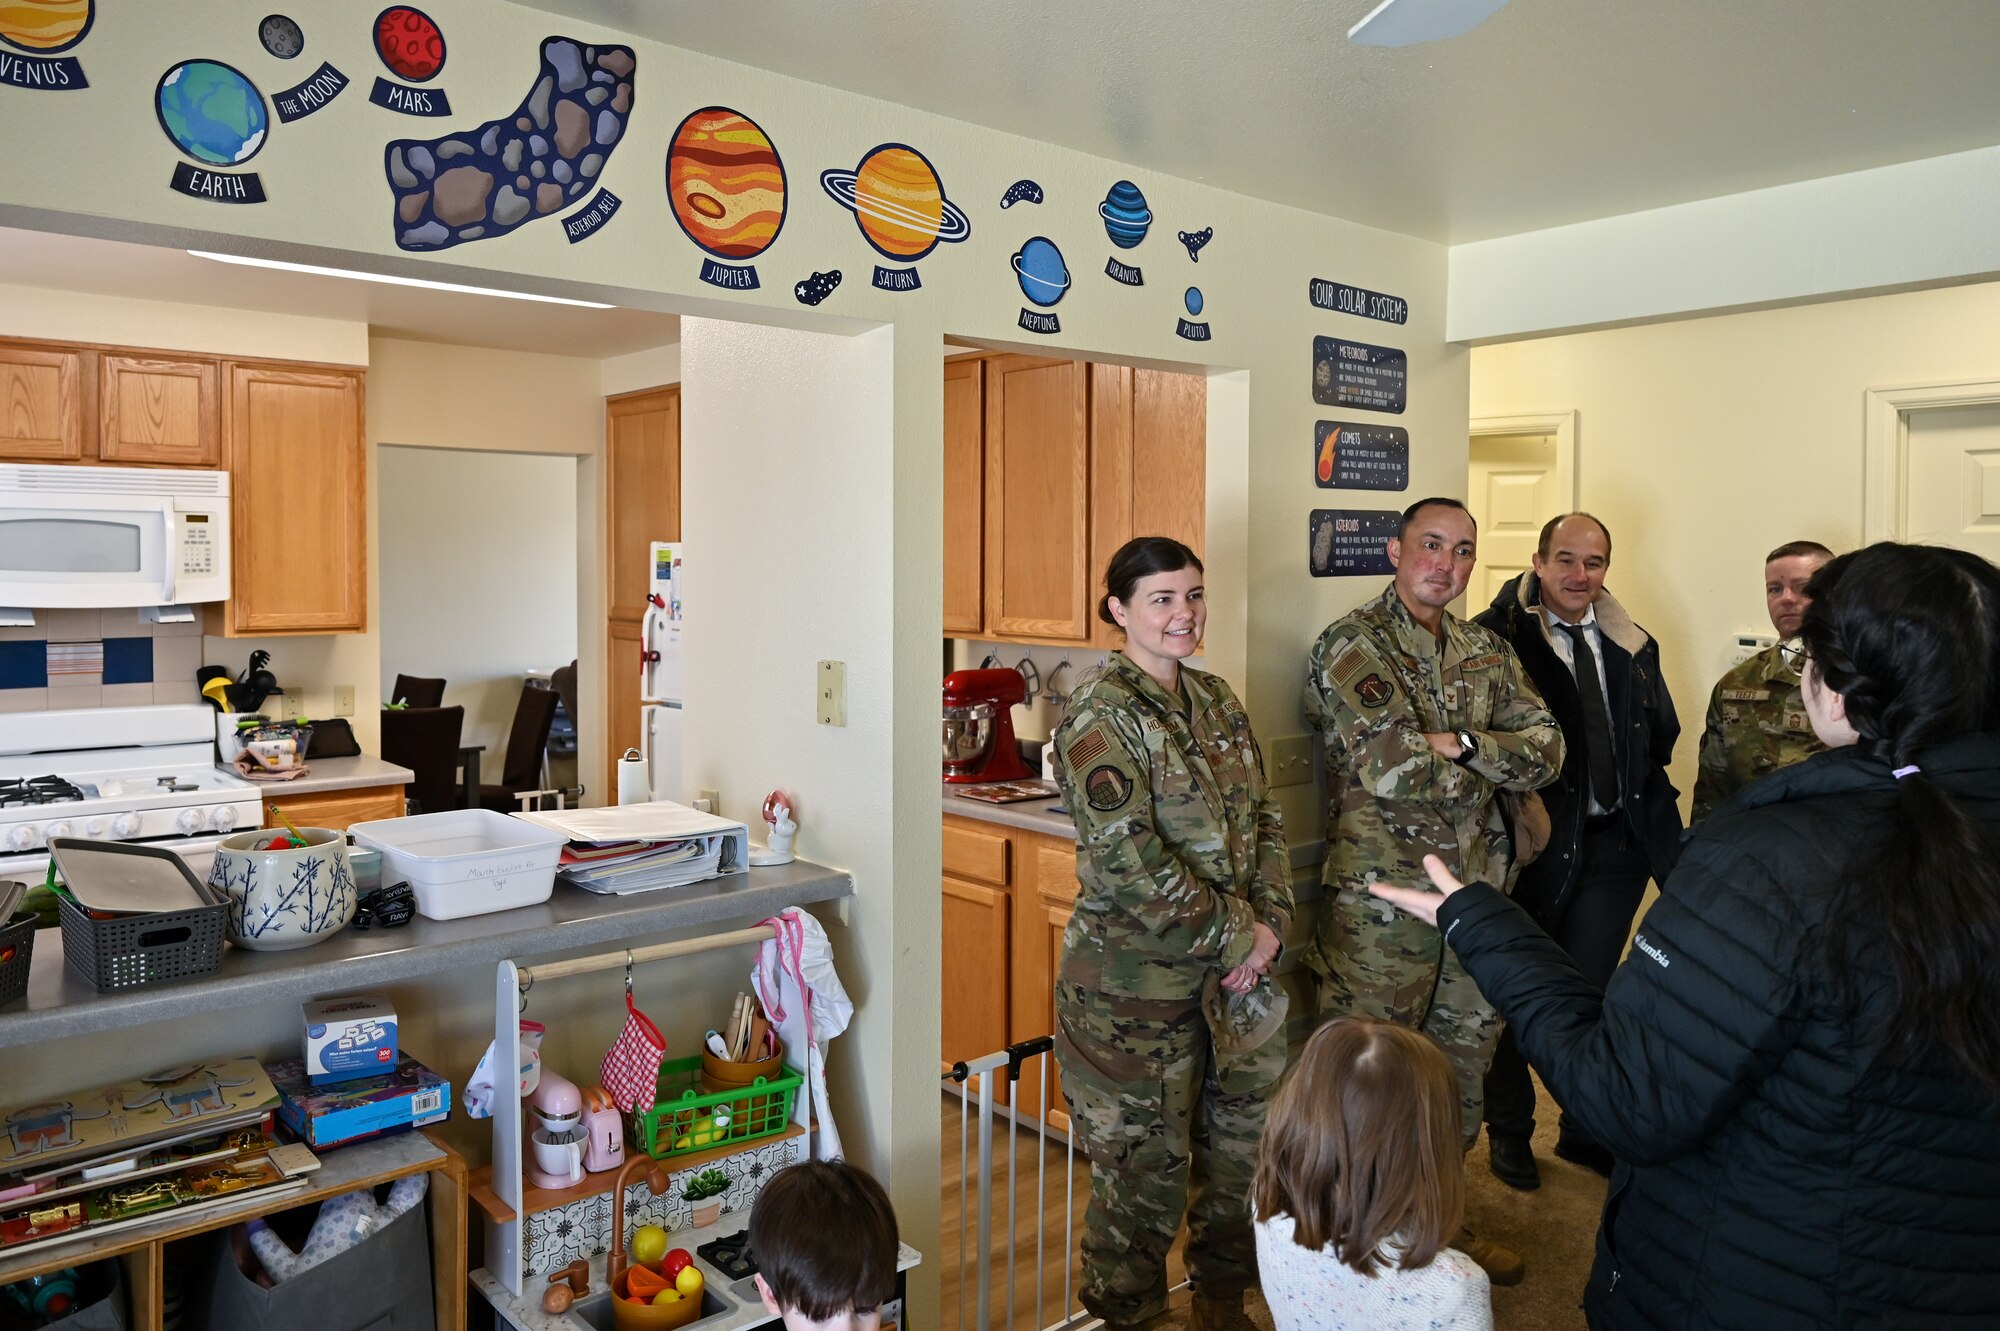 Aimmee Lee, new family child care provider, shows her activity room to Maj. Jennifer Holmstrom, 90th Force Support Squadron commander, Col. John Dines, 90th Mission Support Group commander, and Thomas Cox, 90 FSS deputy director, on F. E. Warren Air Force Base, Wyoming, Feb. 28, 2023. FCC providers give parents peace of mind about their child’s well-being so they can fully focus on the mission. (U.S. Air Force photo by Joseph Coslett Jr.)